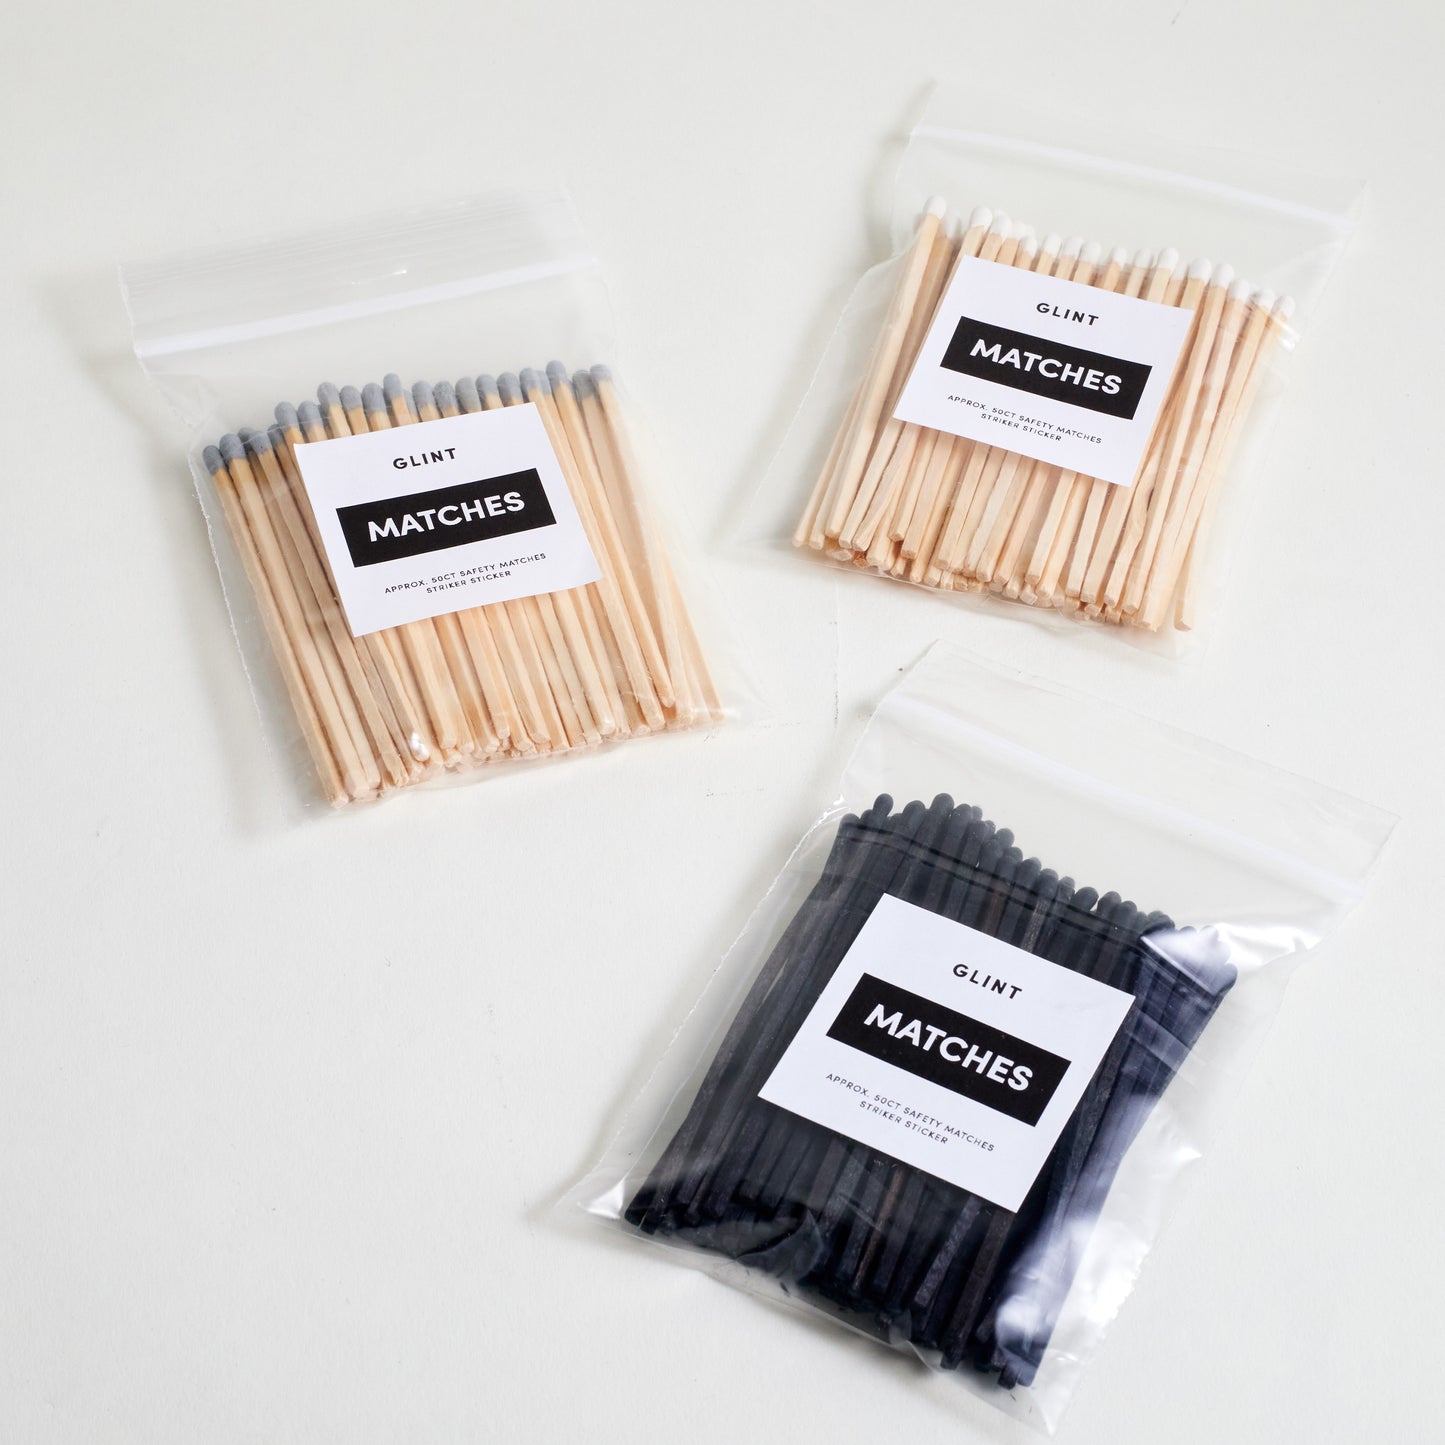 GROUP OF THREE  4 INCH SAFTY MATCHES IN A ZIPLOCK BAG. EACH HAS A GLINT LABEL ON IT 